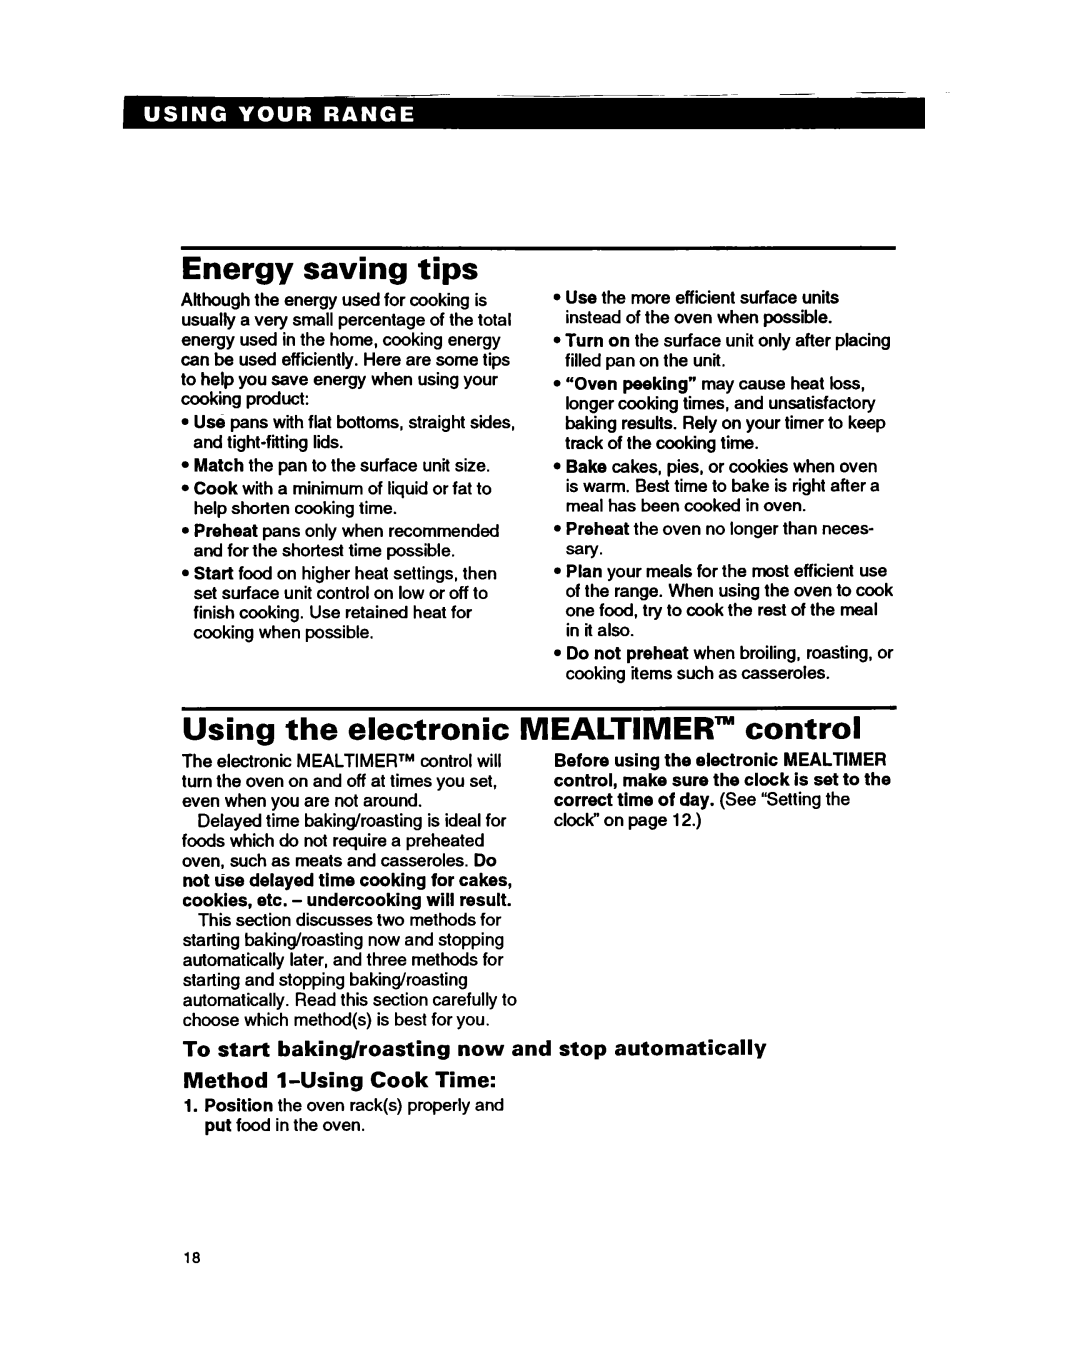 Whirlpool RF385PXY5 warranty Energy saving tips, Using the electronic MEALTIMER” control, Method l-UsingCook Time 